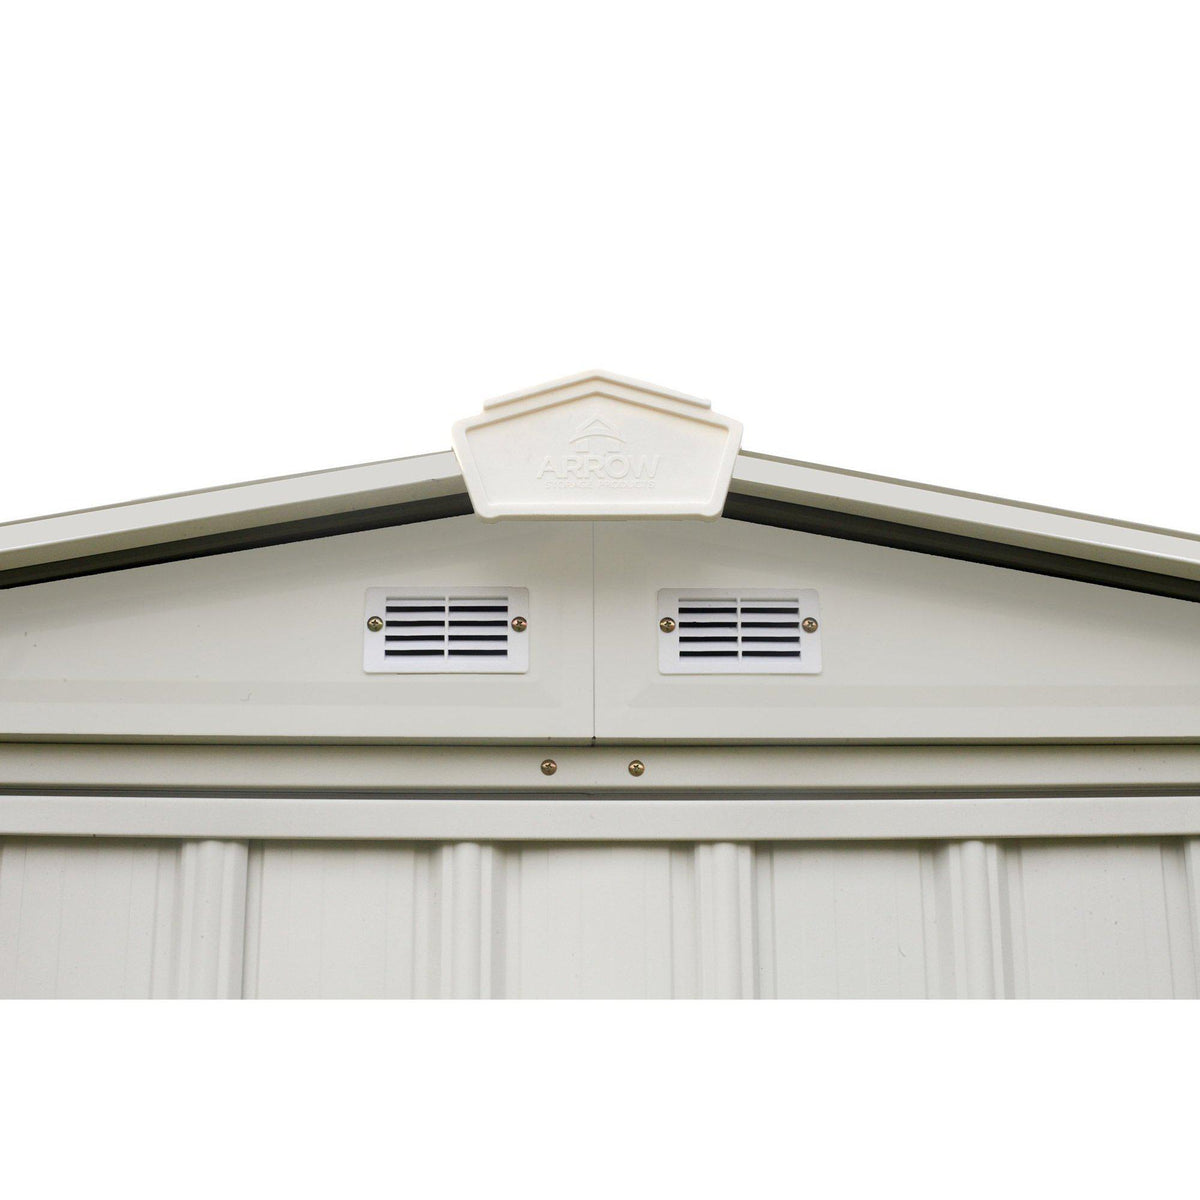 Arrow EZEE Shed Low Gable Steel Storage Shed, Cream, 6 x 5 ft.